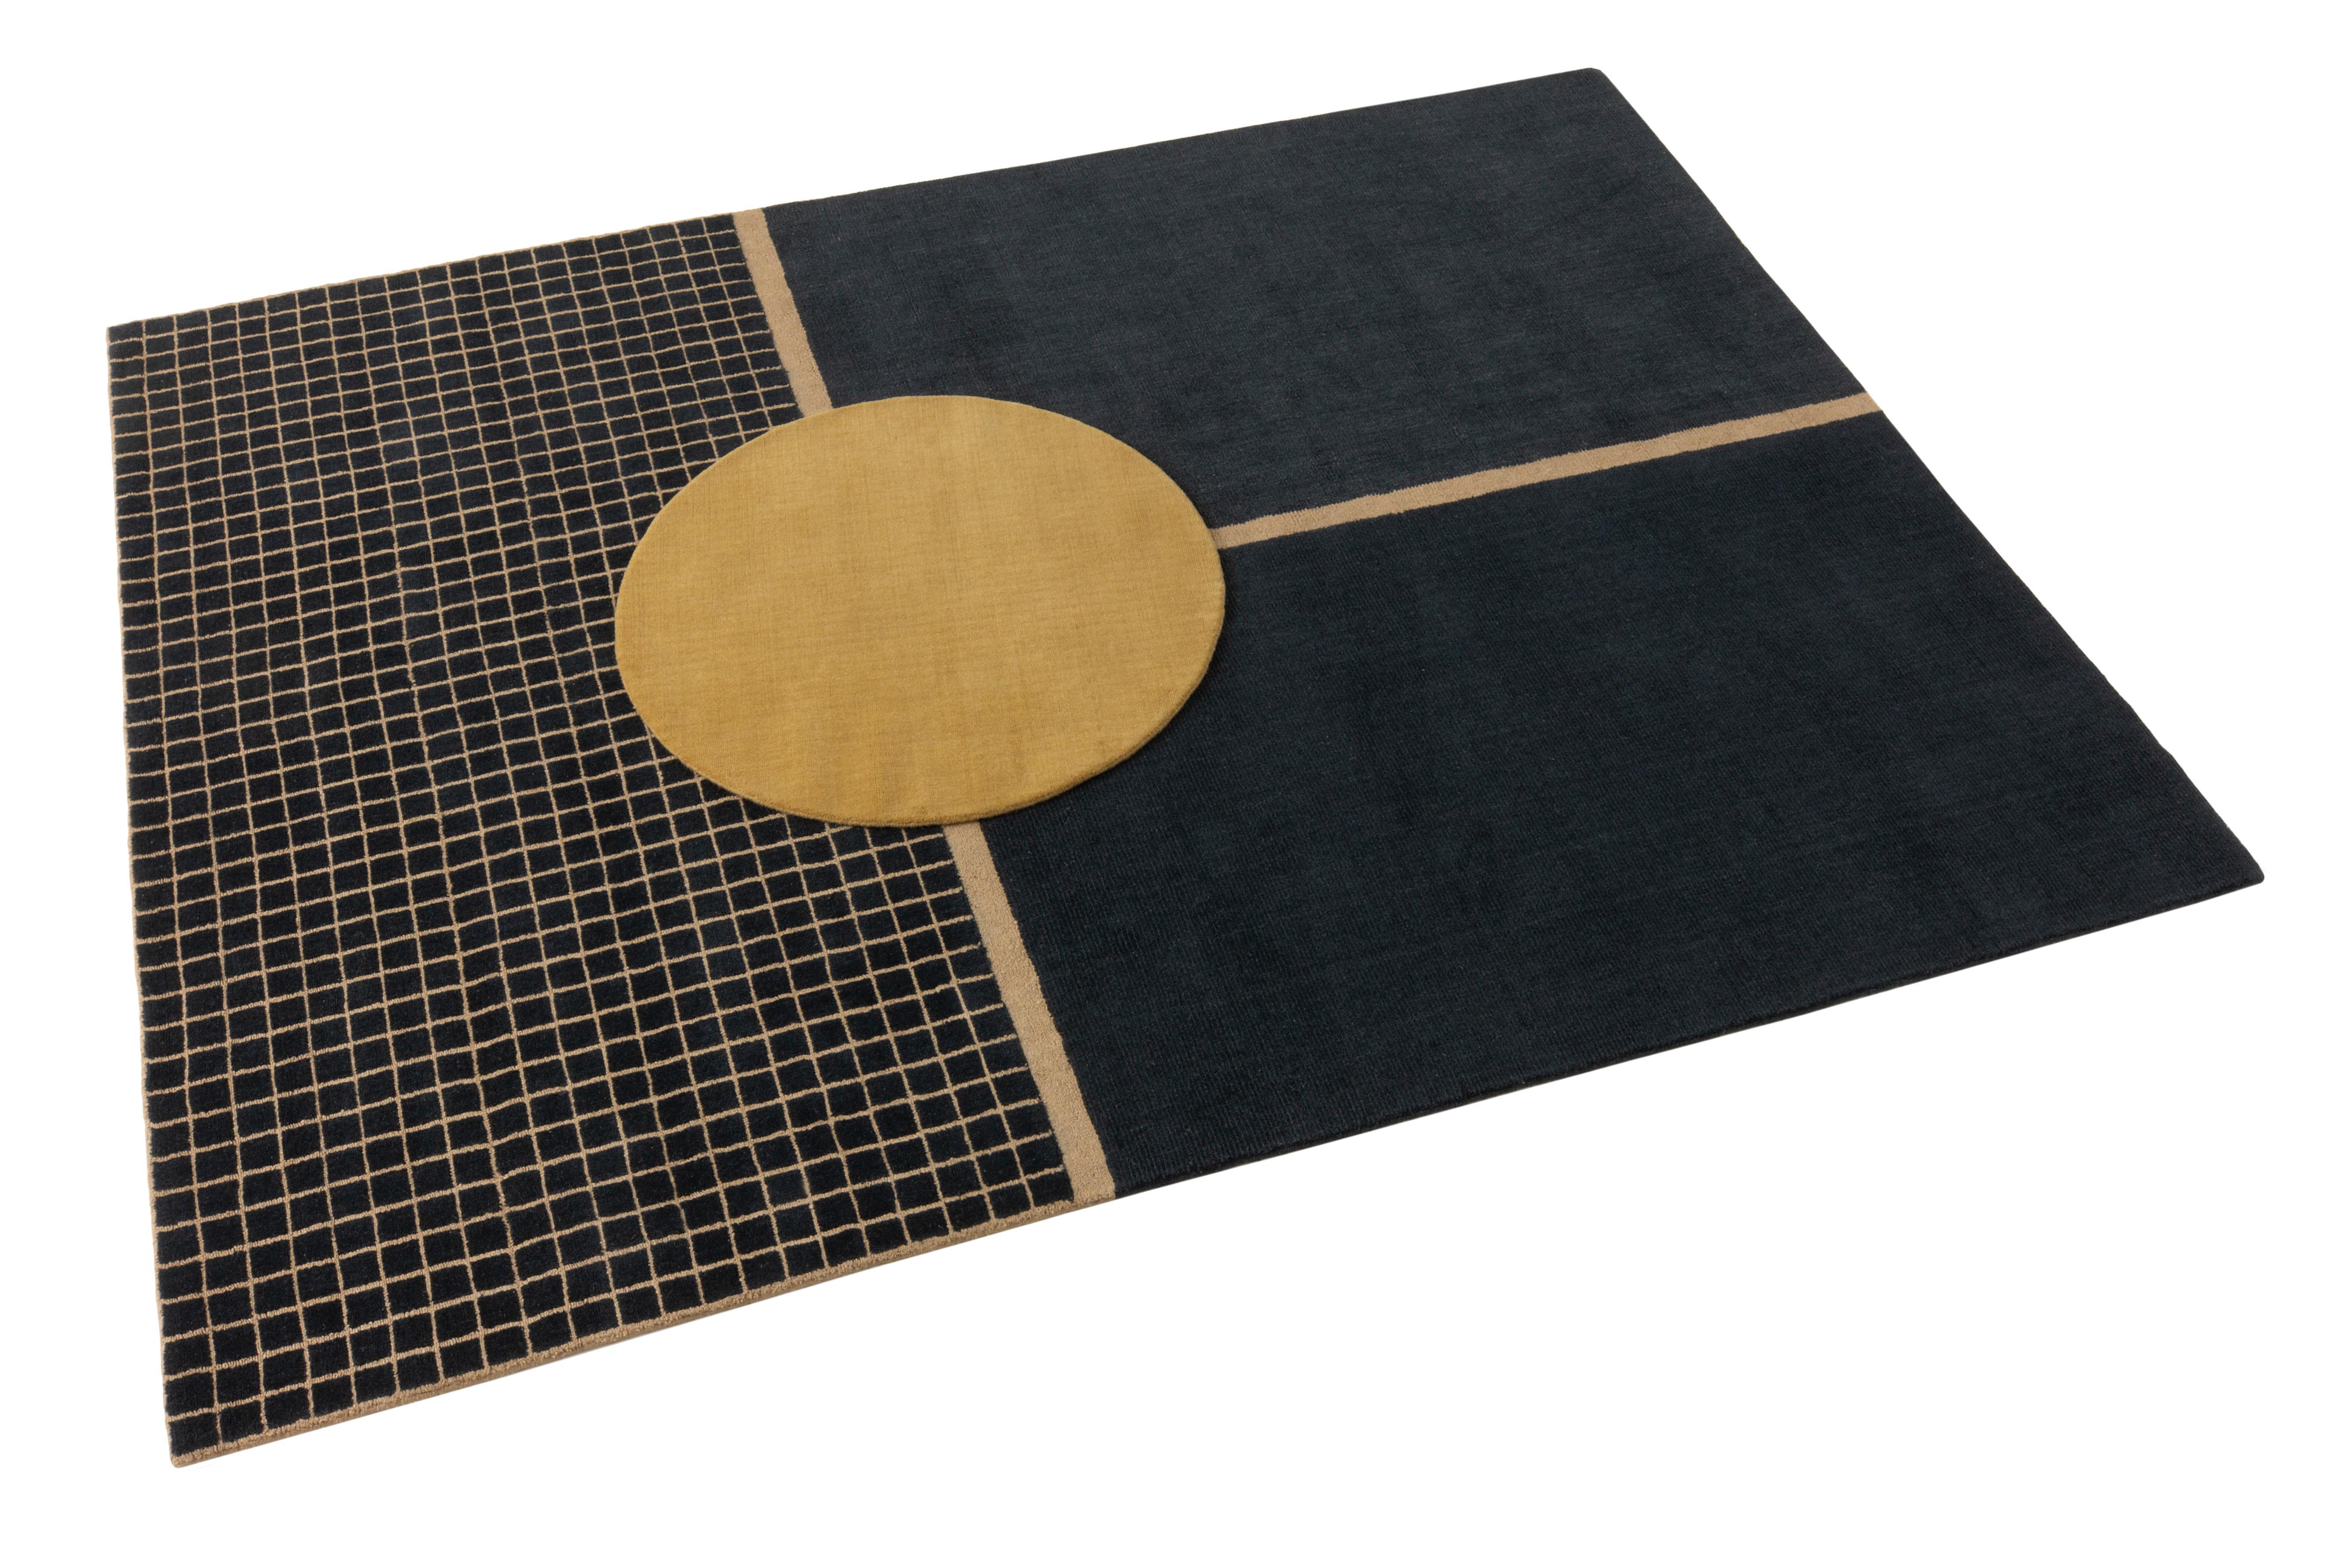 Designed by textile designer Mae Engelgeer and inspired by the feeling, aesthetics and graphic alignment of the traditional Japanese Tatami flooring, Ceremony is a group of three rugs, Daytime, Evening Glow and Moonlight, and a circular one, Focus,